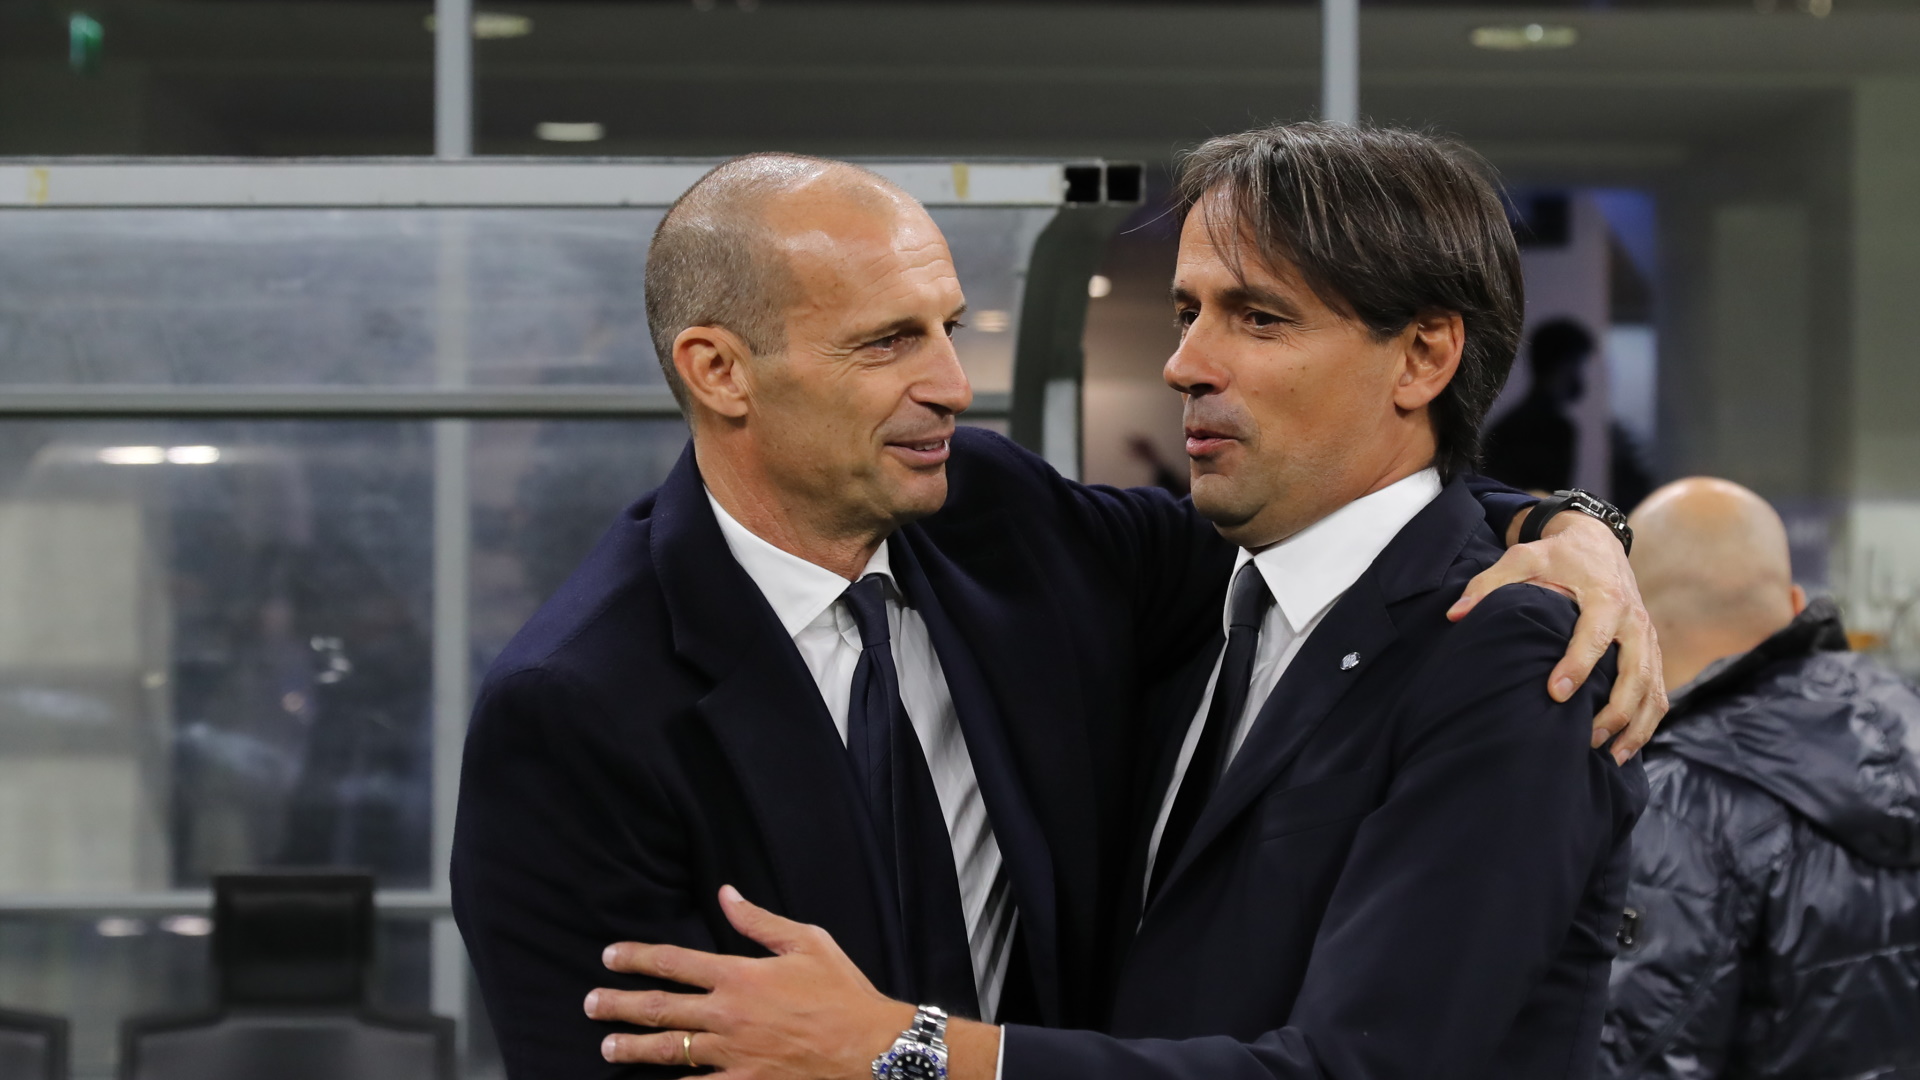 Despite their sides' poor showings to start the season, Massimiliano Allegri and Simone Inzaghi will be at the helm of Juventus and Inter after the break.